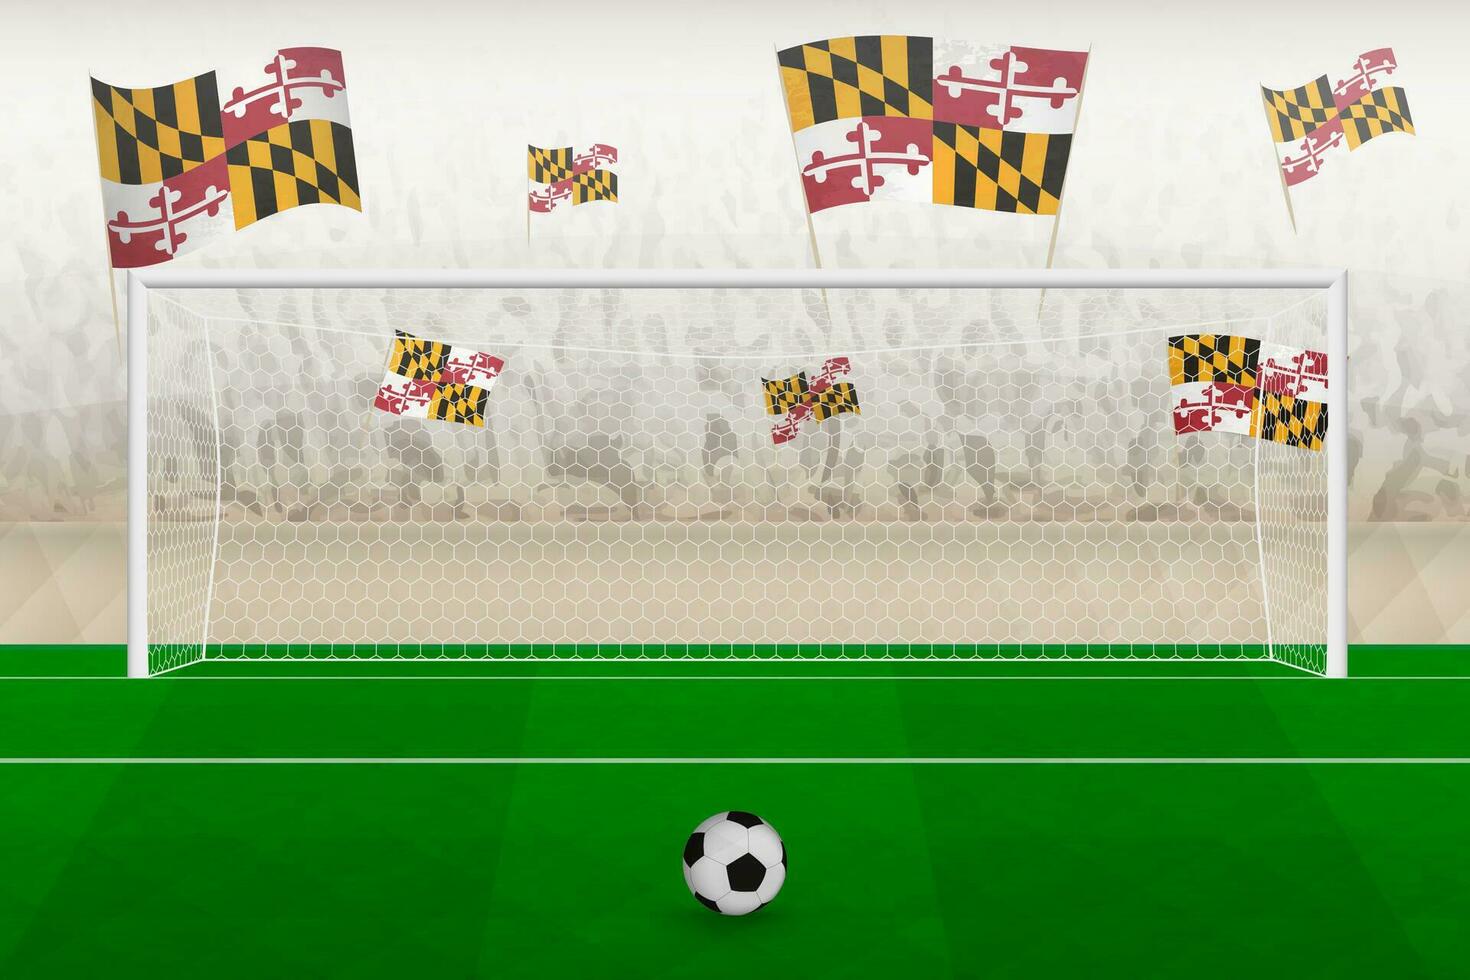 Maryland football team fans with flags of Maryland cheering on stadium, penalty kick concept in a soccer match. vector